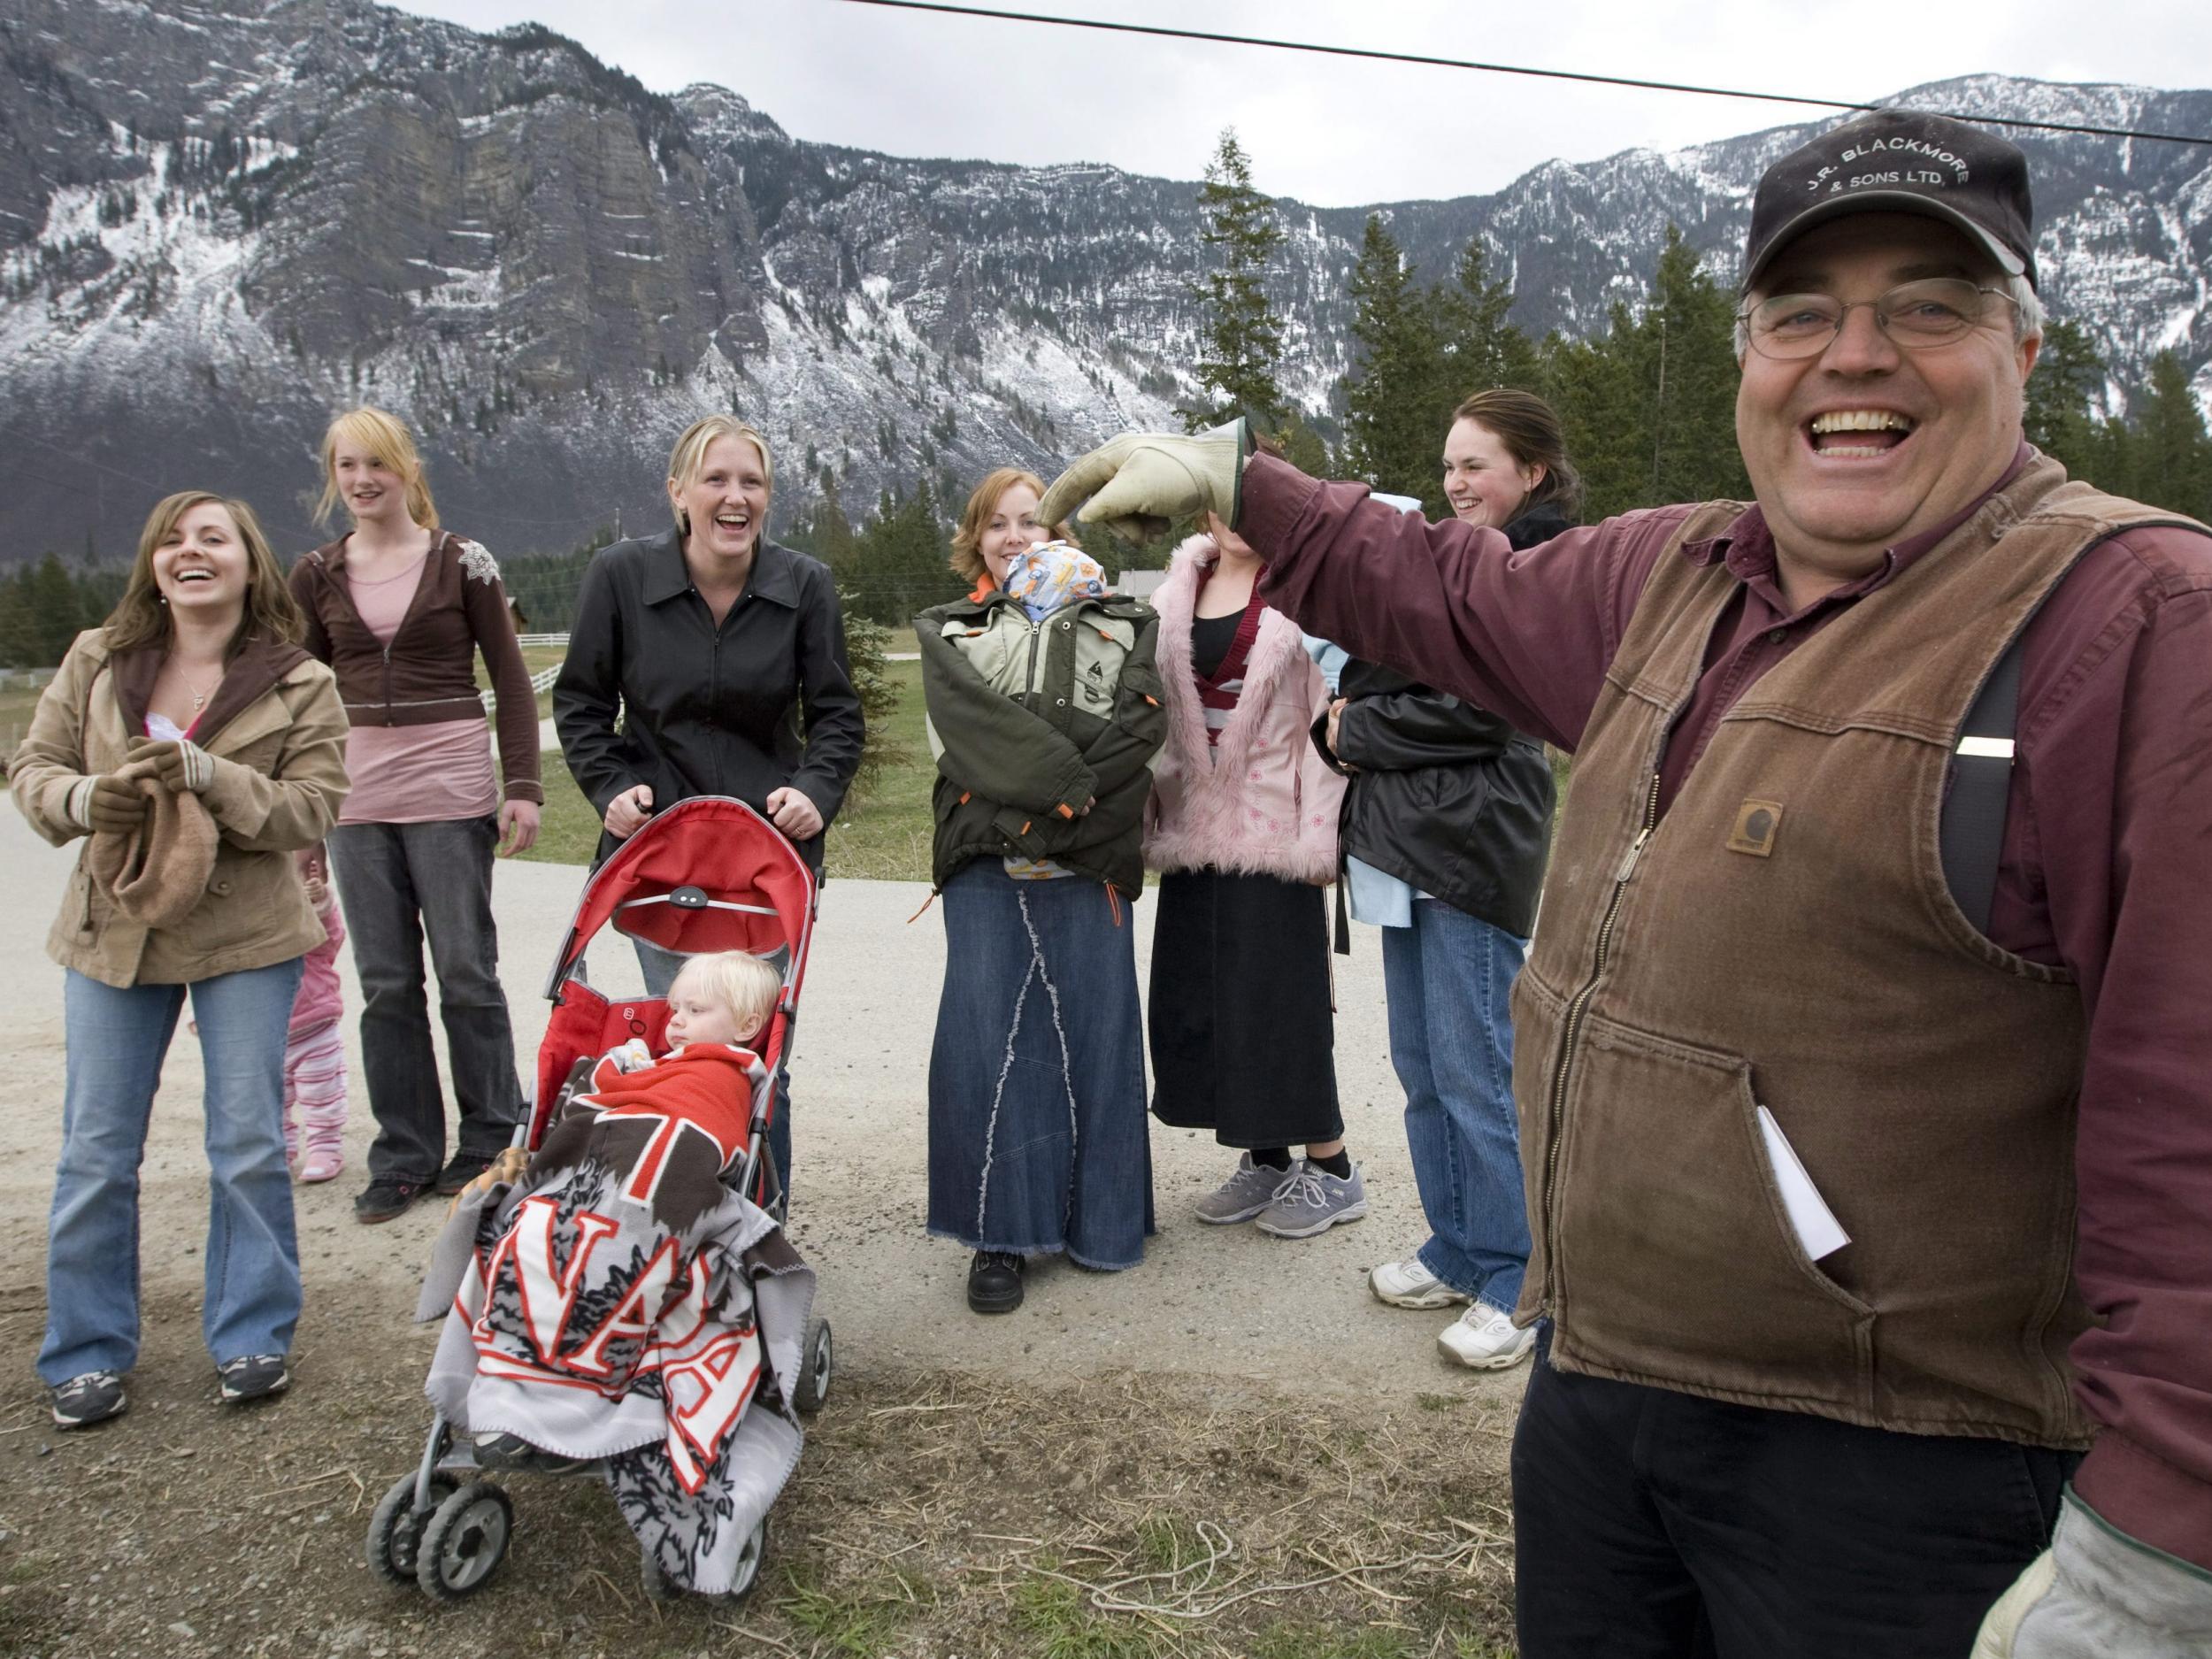 Winston Blackmore, leader of the controversial polygamous religious community of Bountiful based near Creston, British Columbia, pictured with six of his daughters and two of his grandchildren in 2008